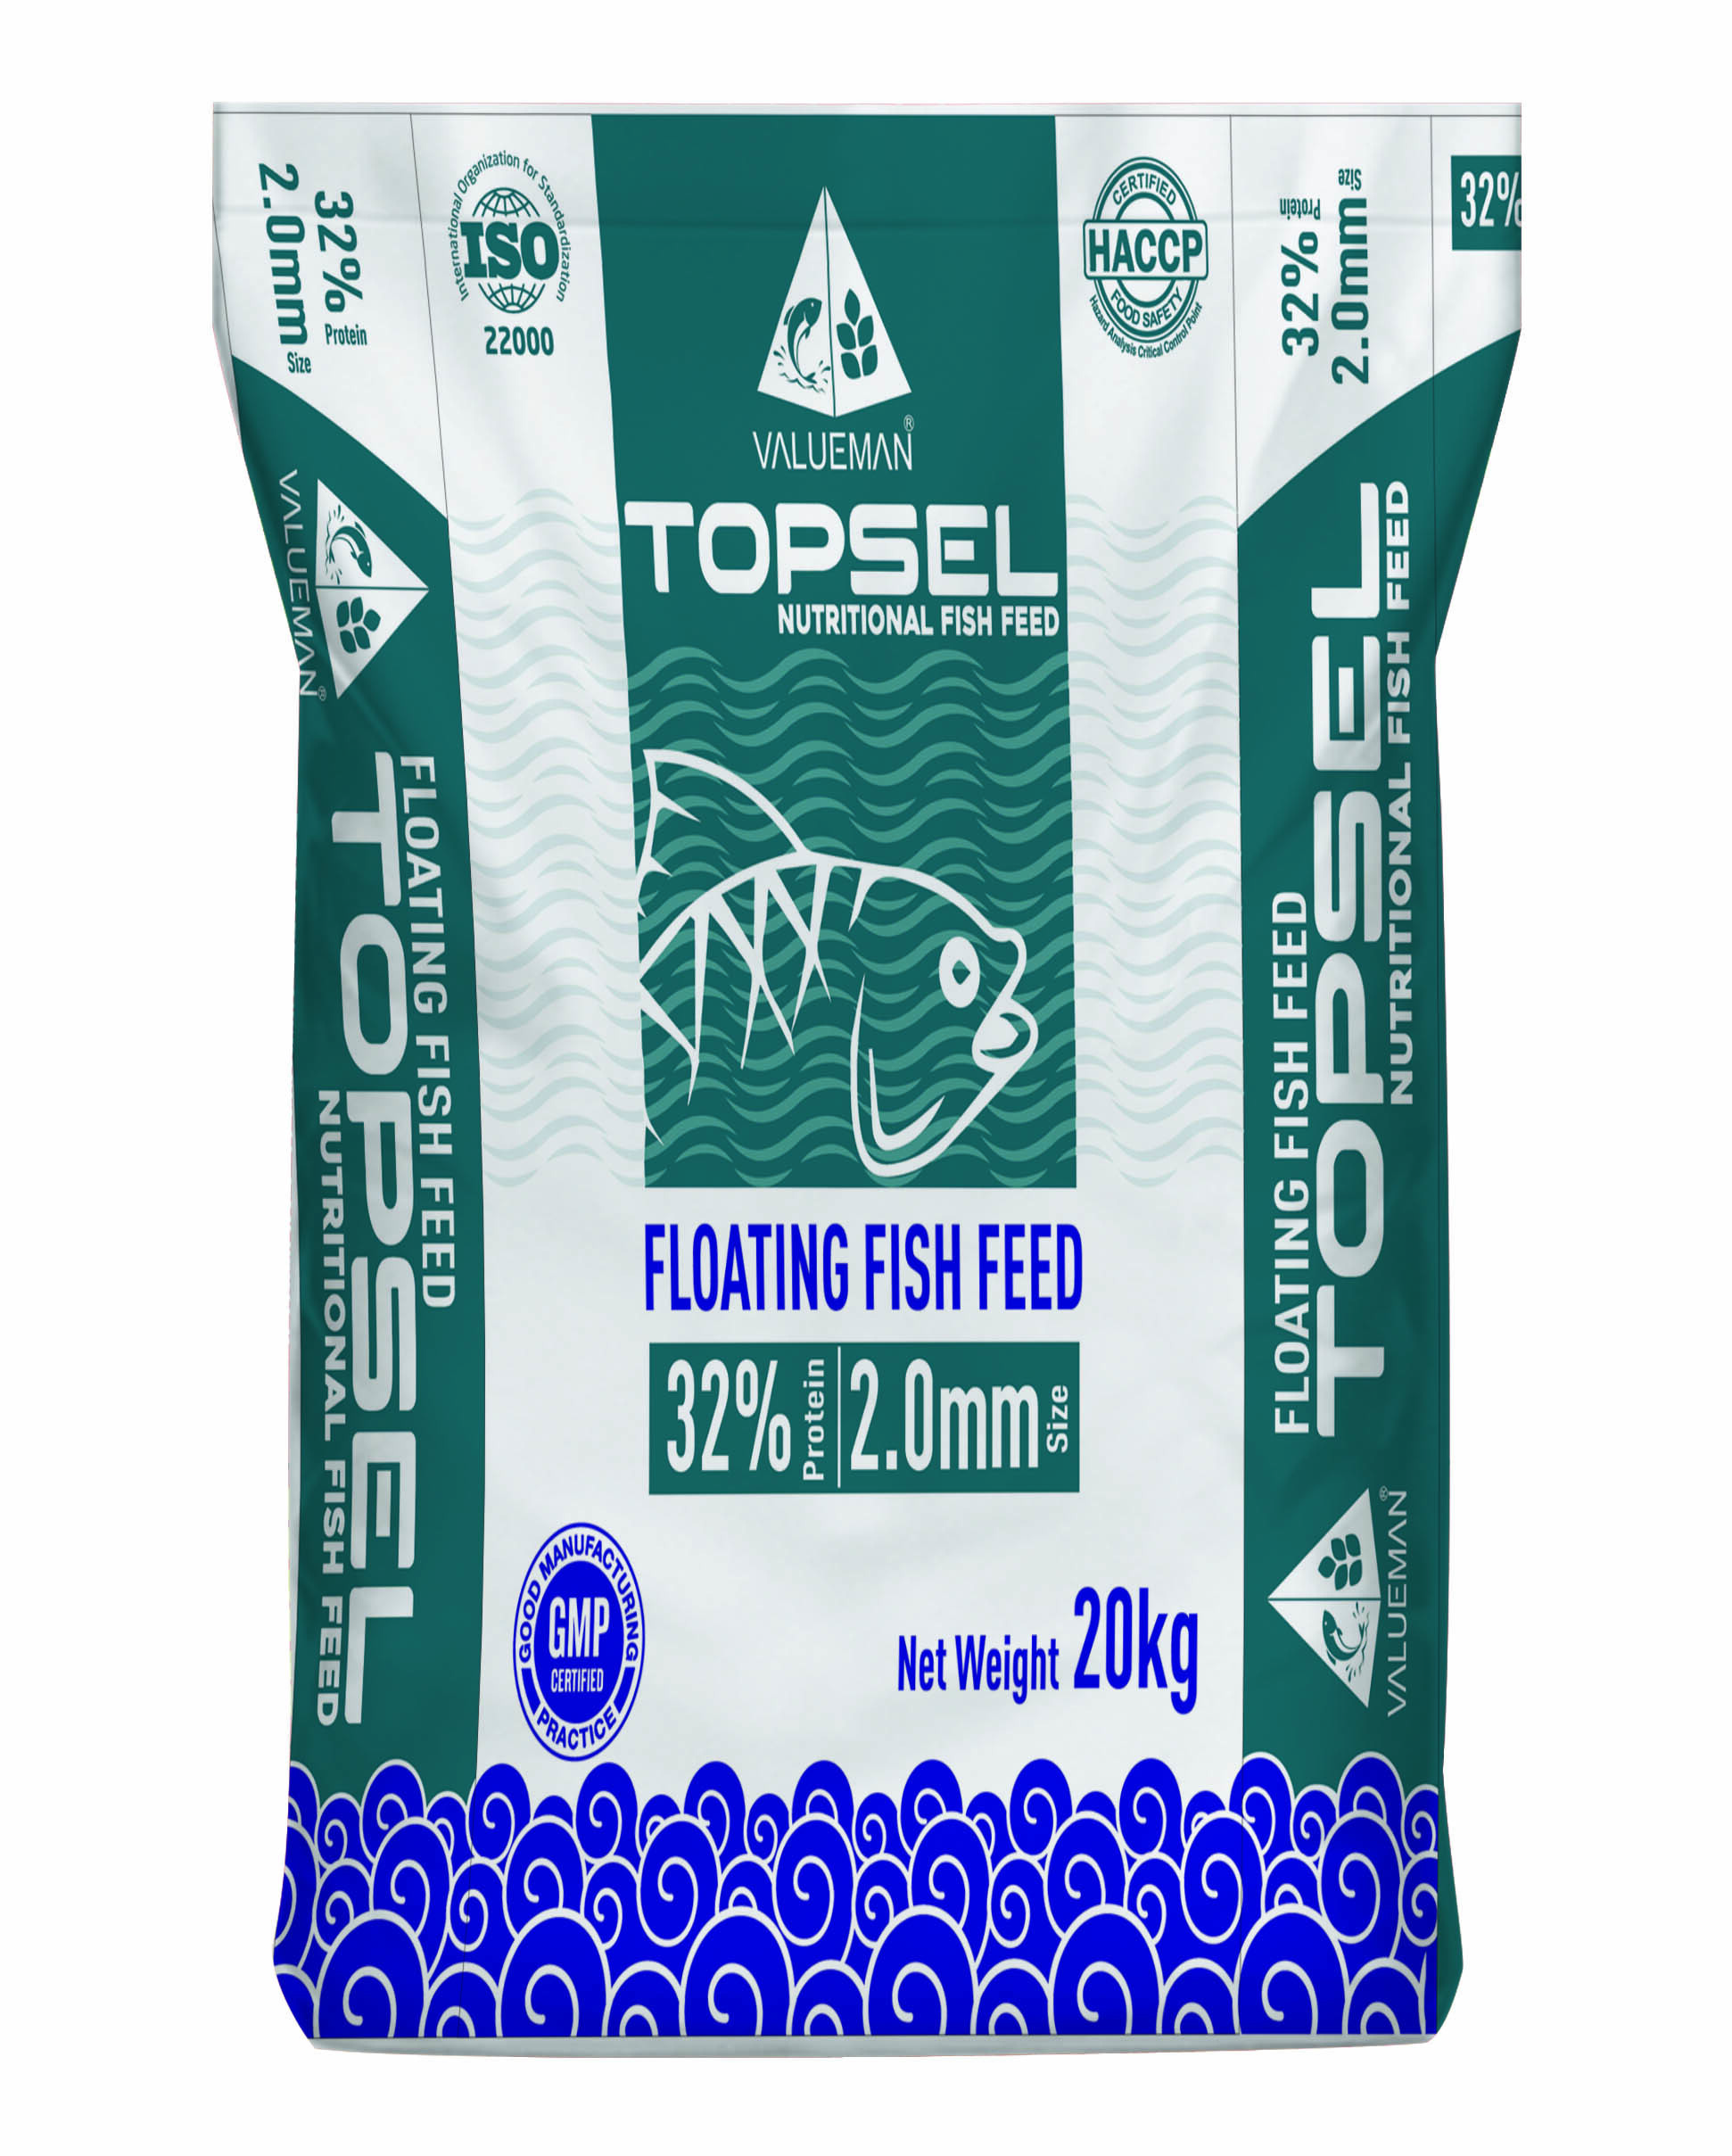 Floating Fish Feed Size (0.8mm - 4mm) 22P/4F to 42P/6F